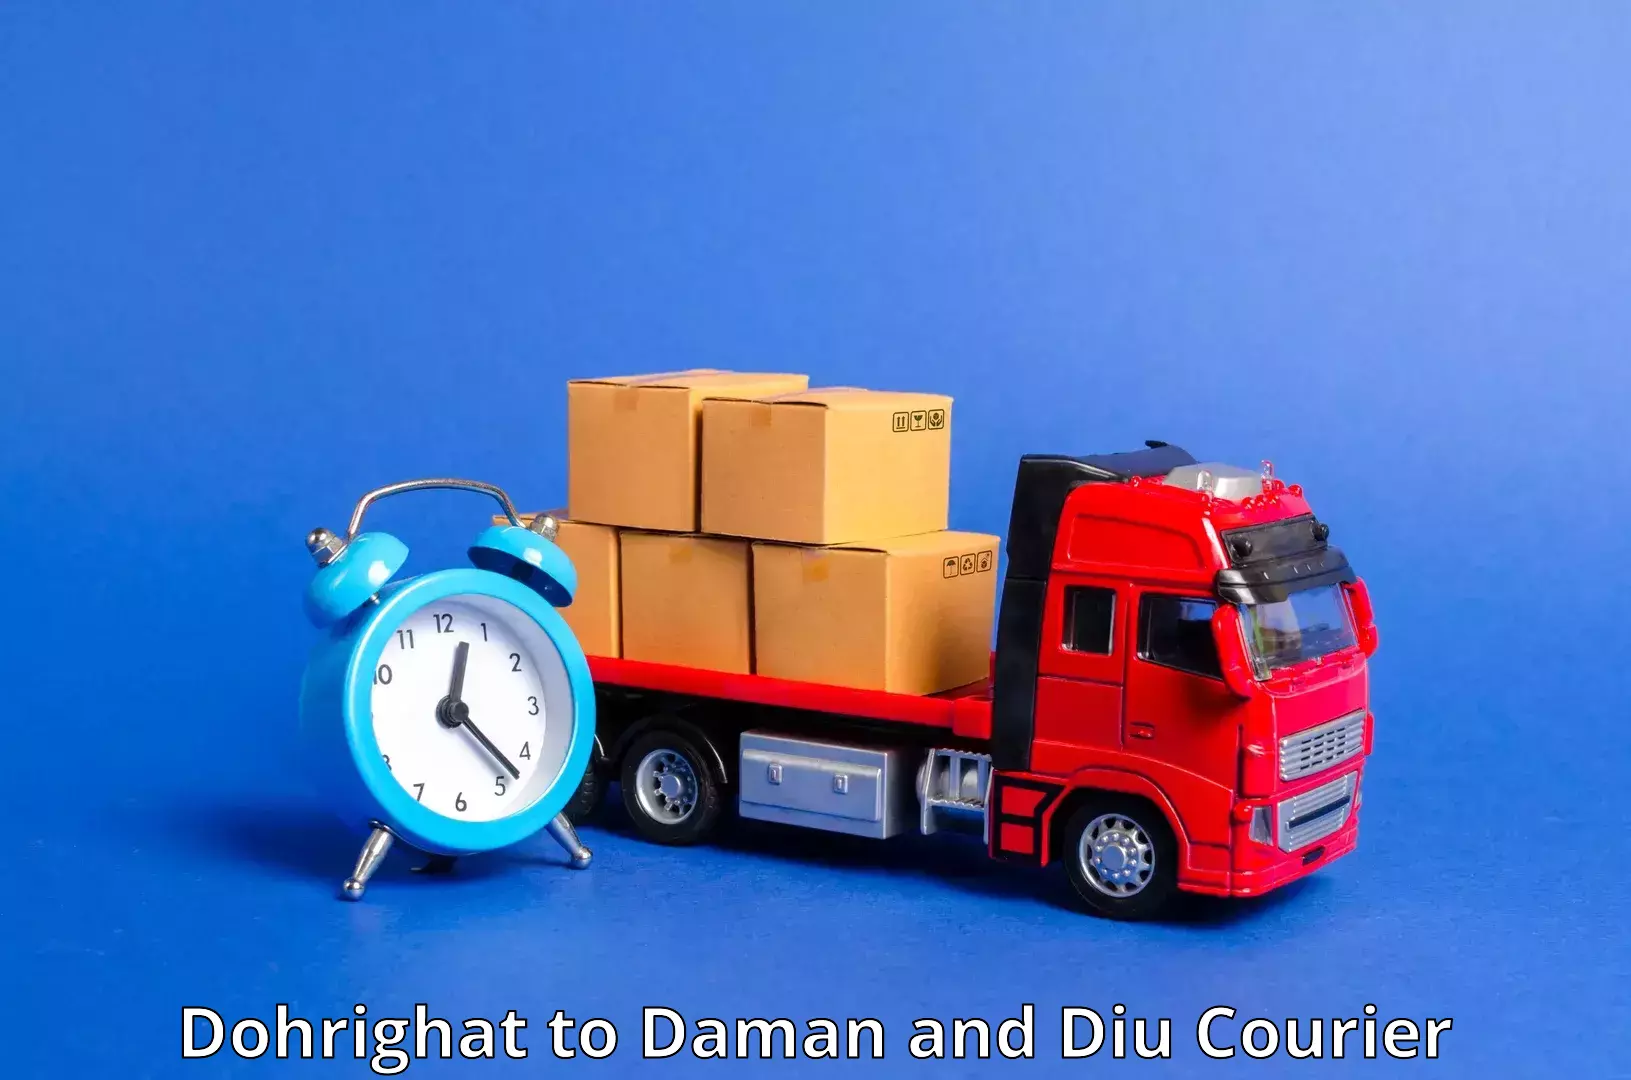 High-priority parcel service Dohrighat to Daman